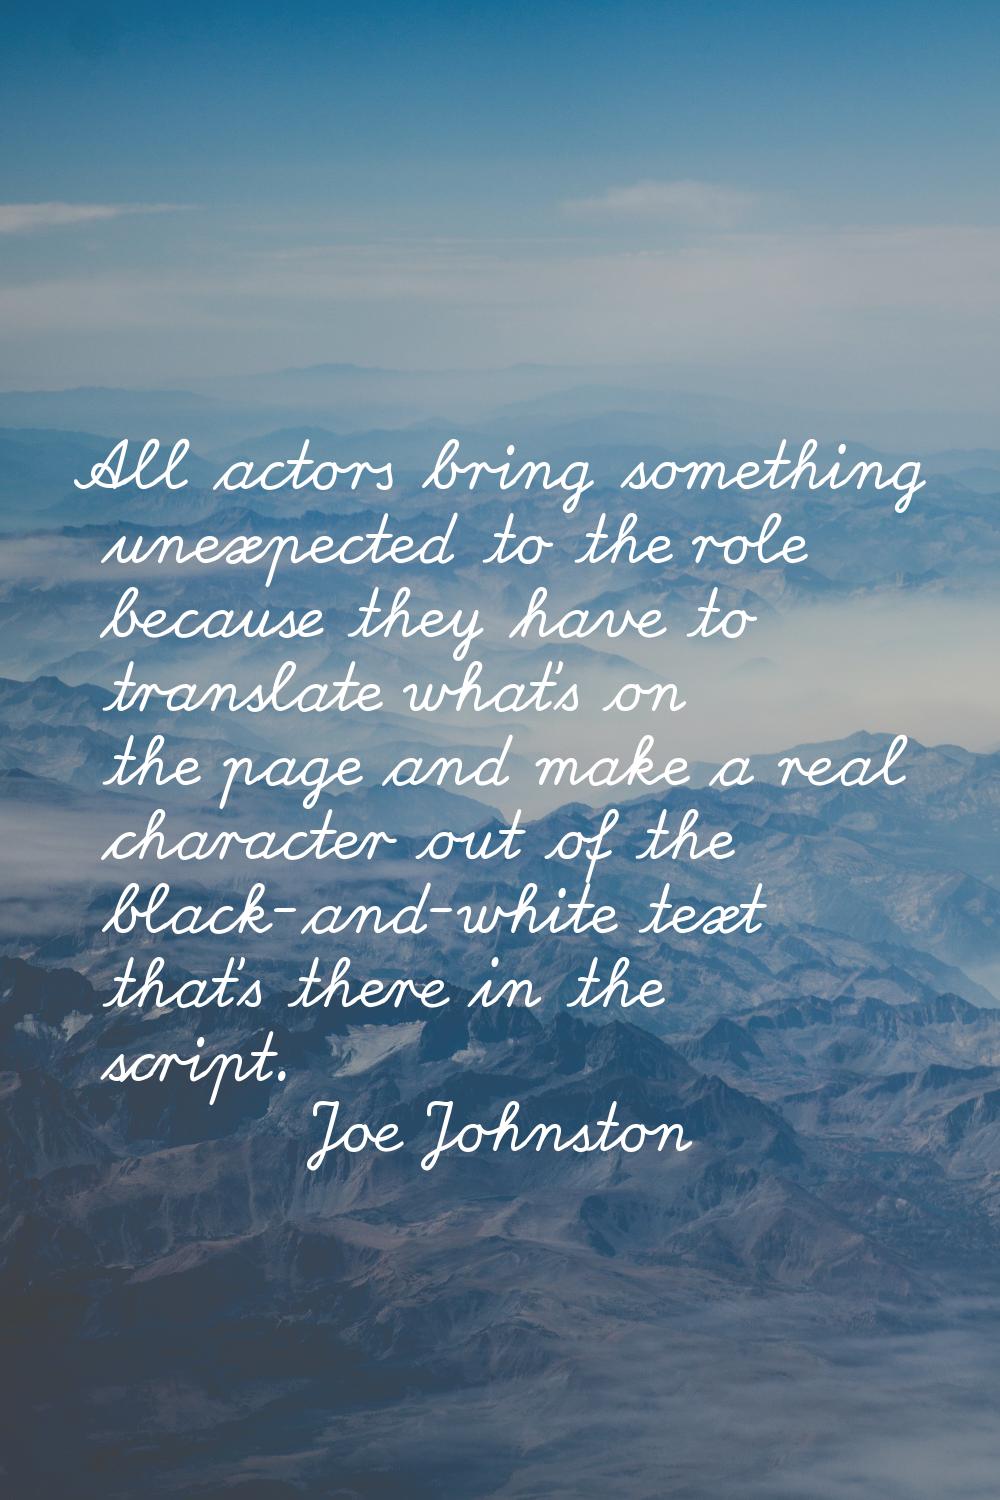 All actors bring something unexpected to the role because they have to translate what's on the page